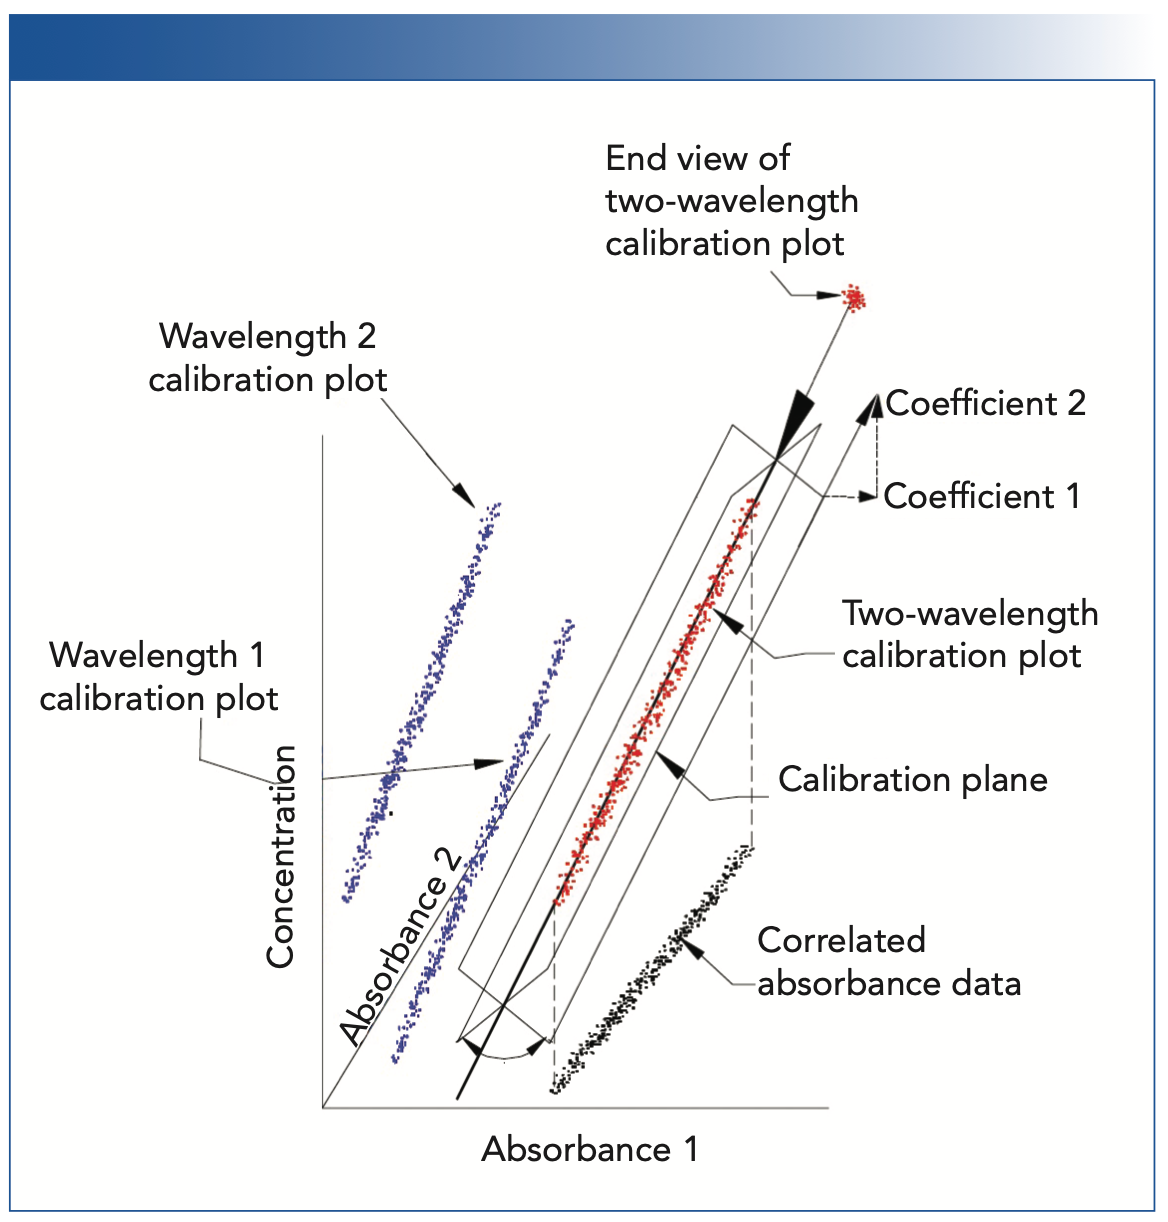 FIGURE 1: Illustration of the effect of intercorrelation of the calibration data on the determination of the calibration coefficients (reproduced from [3]).